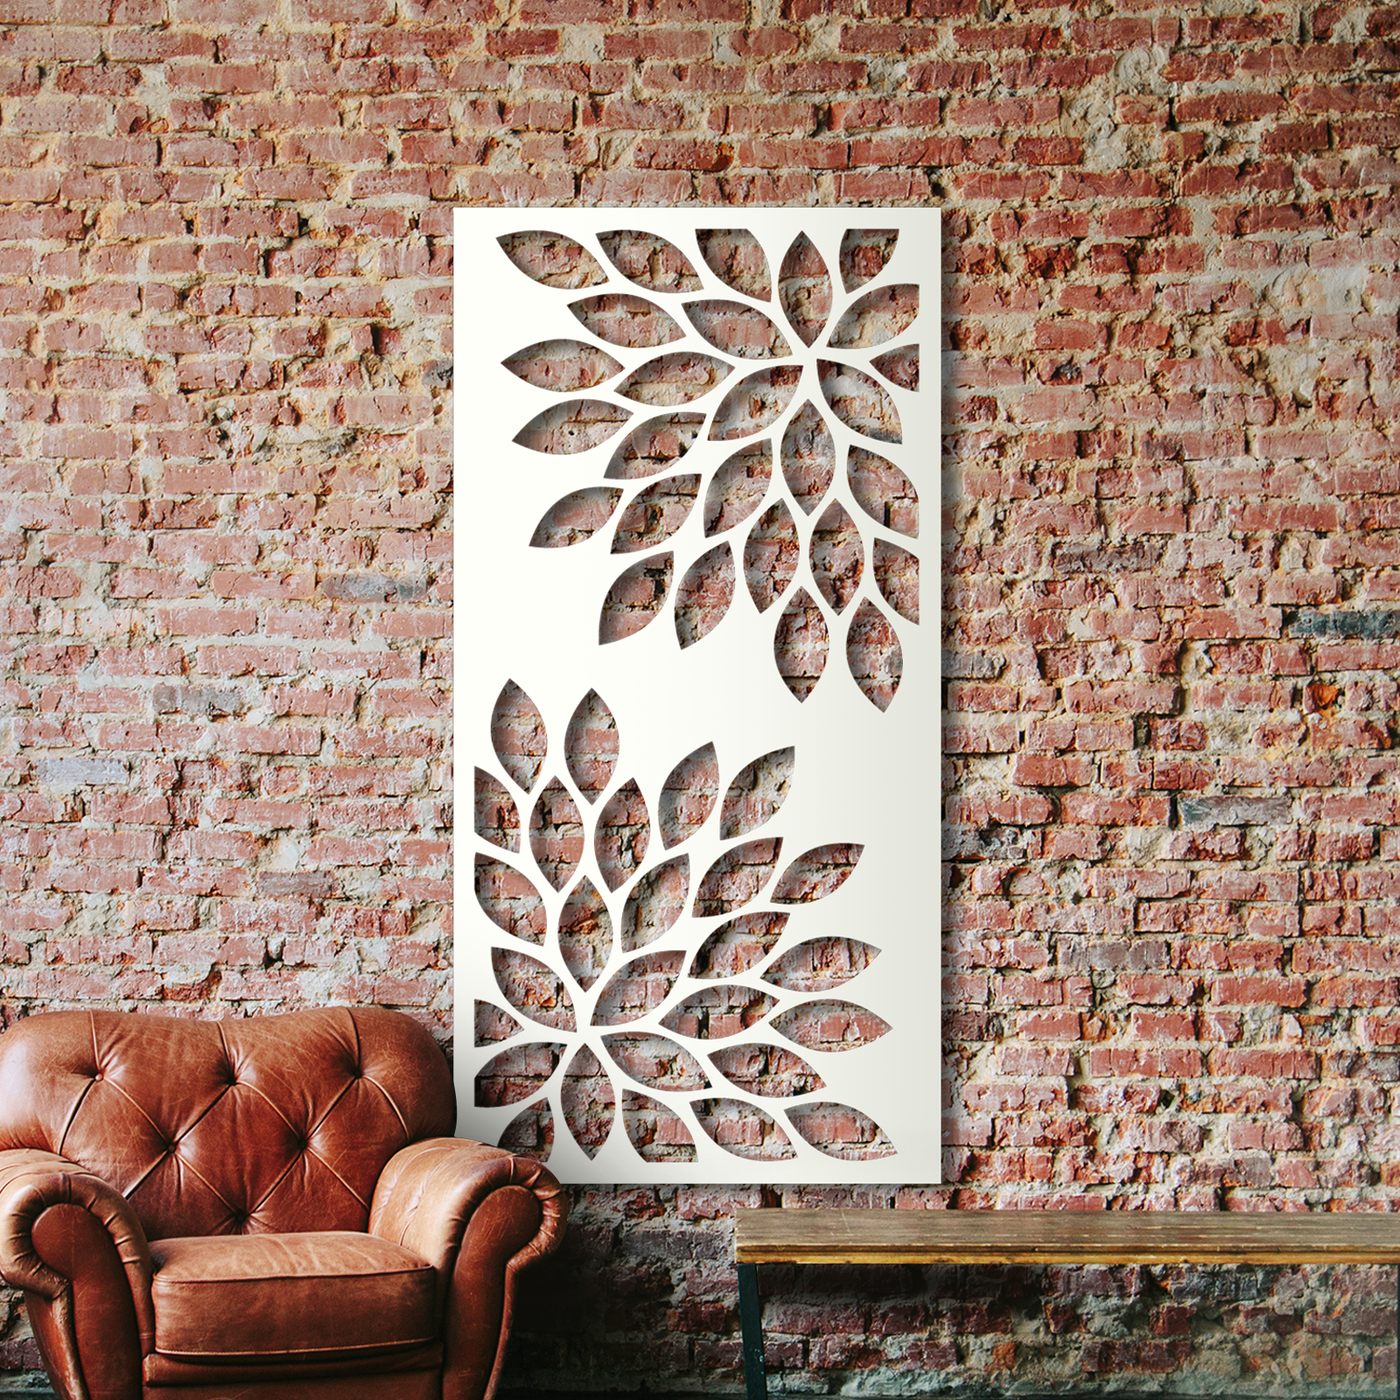 Chrysanthemum Metal Screen: The Perfect Combination of Beauty and Durability